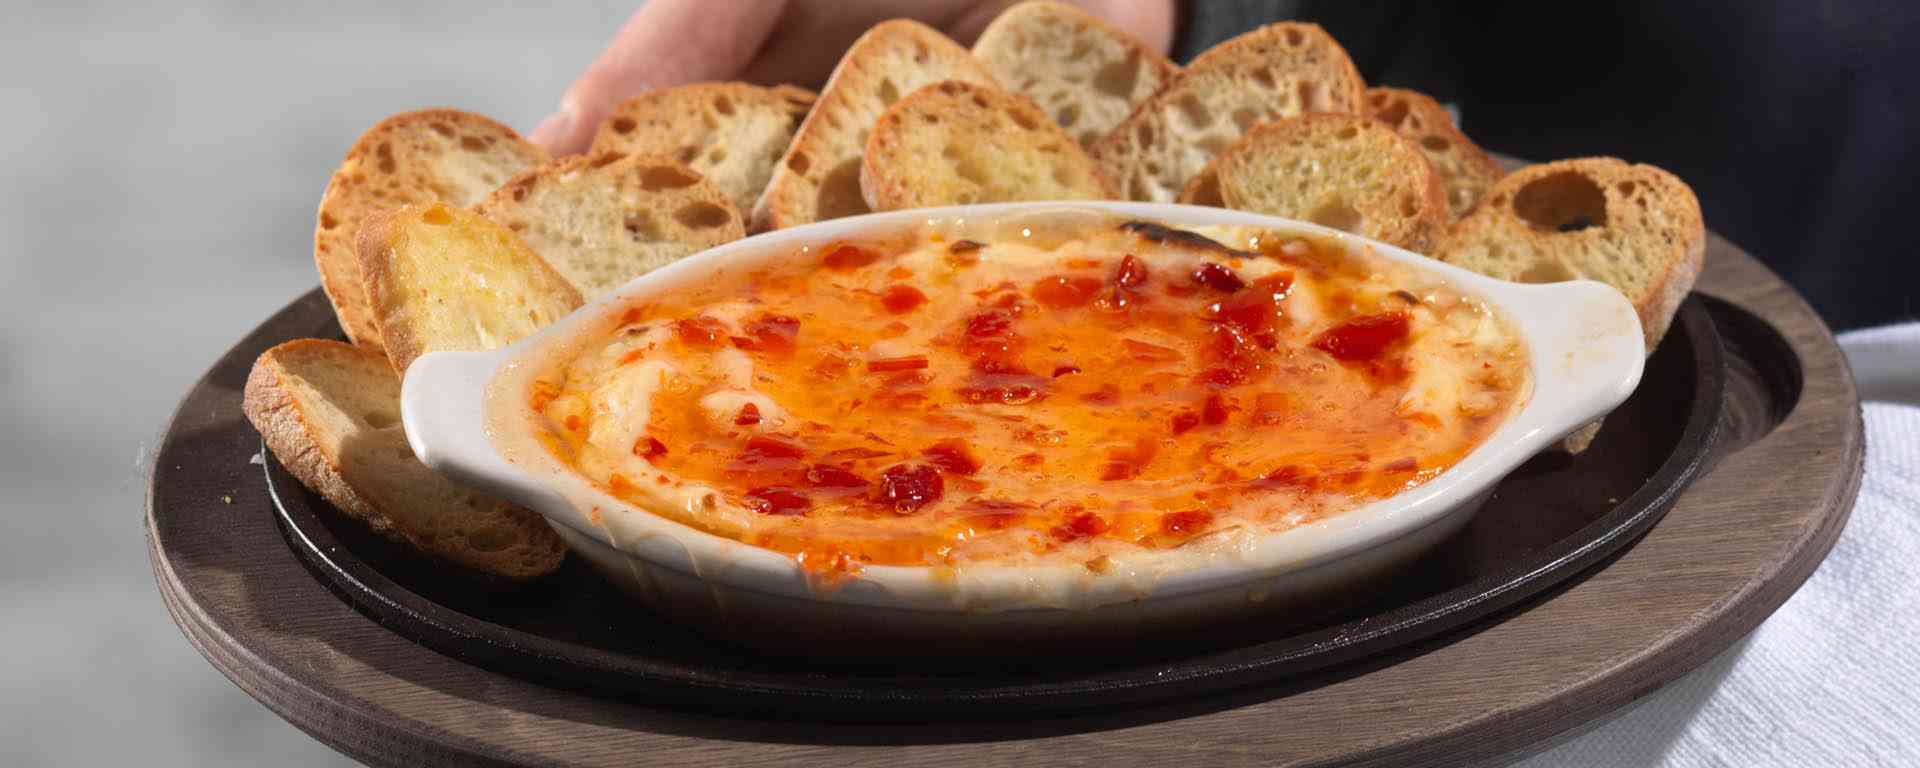 Photo for - Sweet and Spicy Goat Cheese and Red Pepper Baked Dip